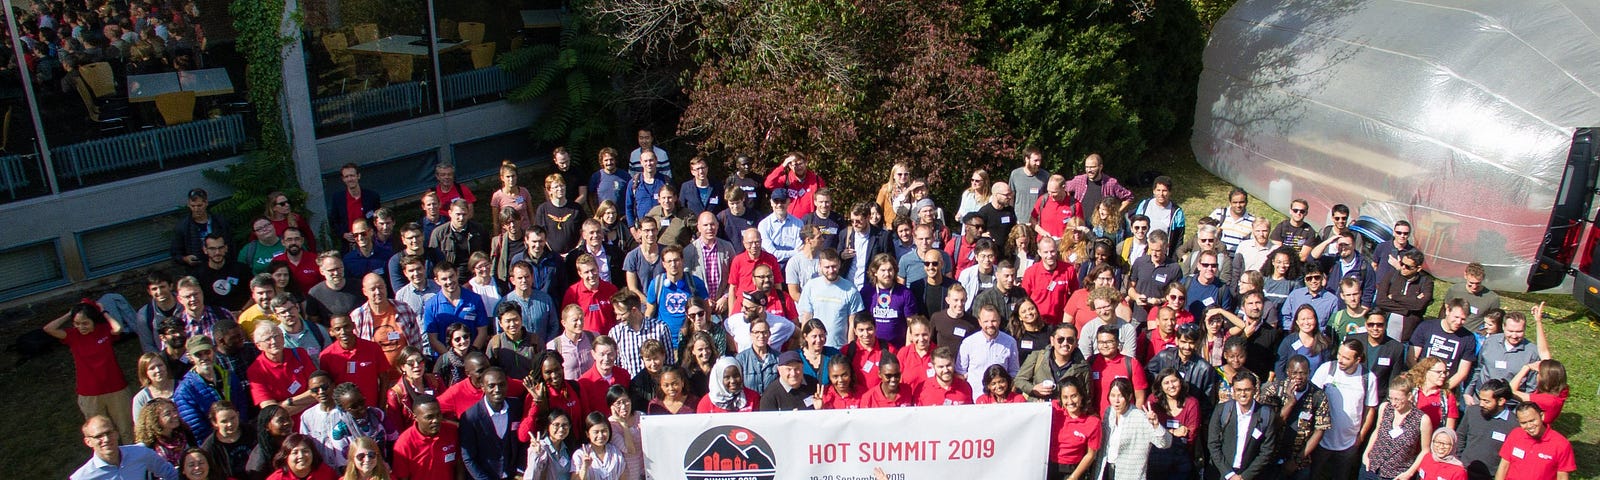 Group photo of all the attendees at the 5th annual HOT Summit in Heidelberg, Germany.